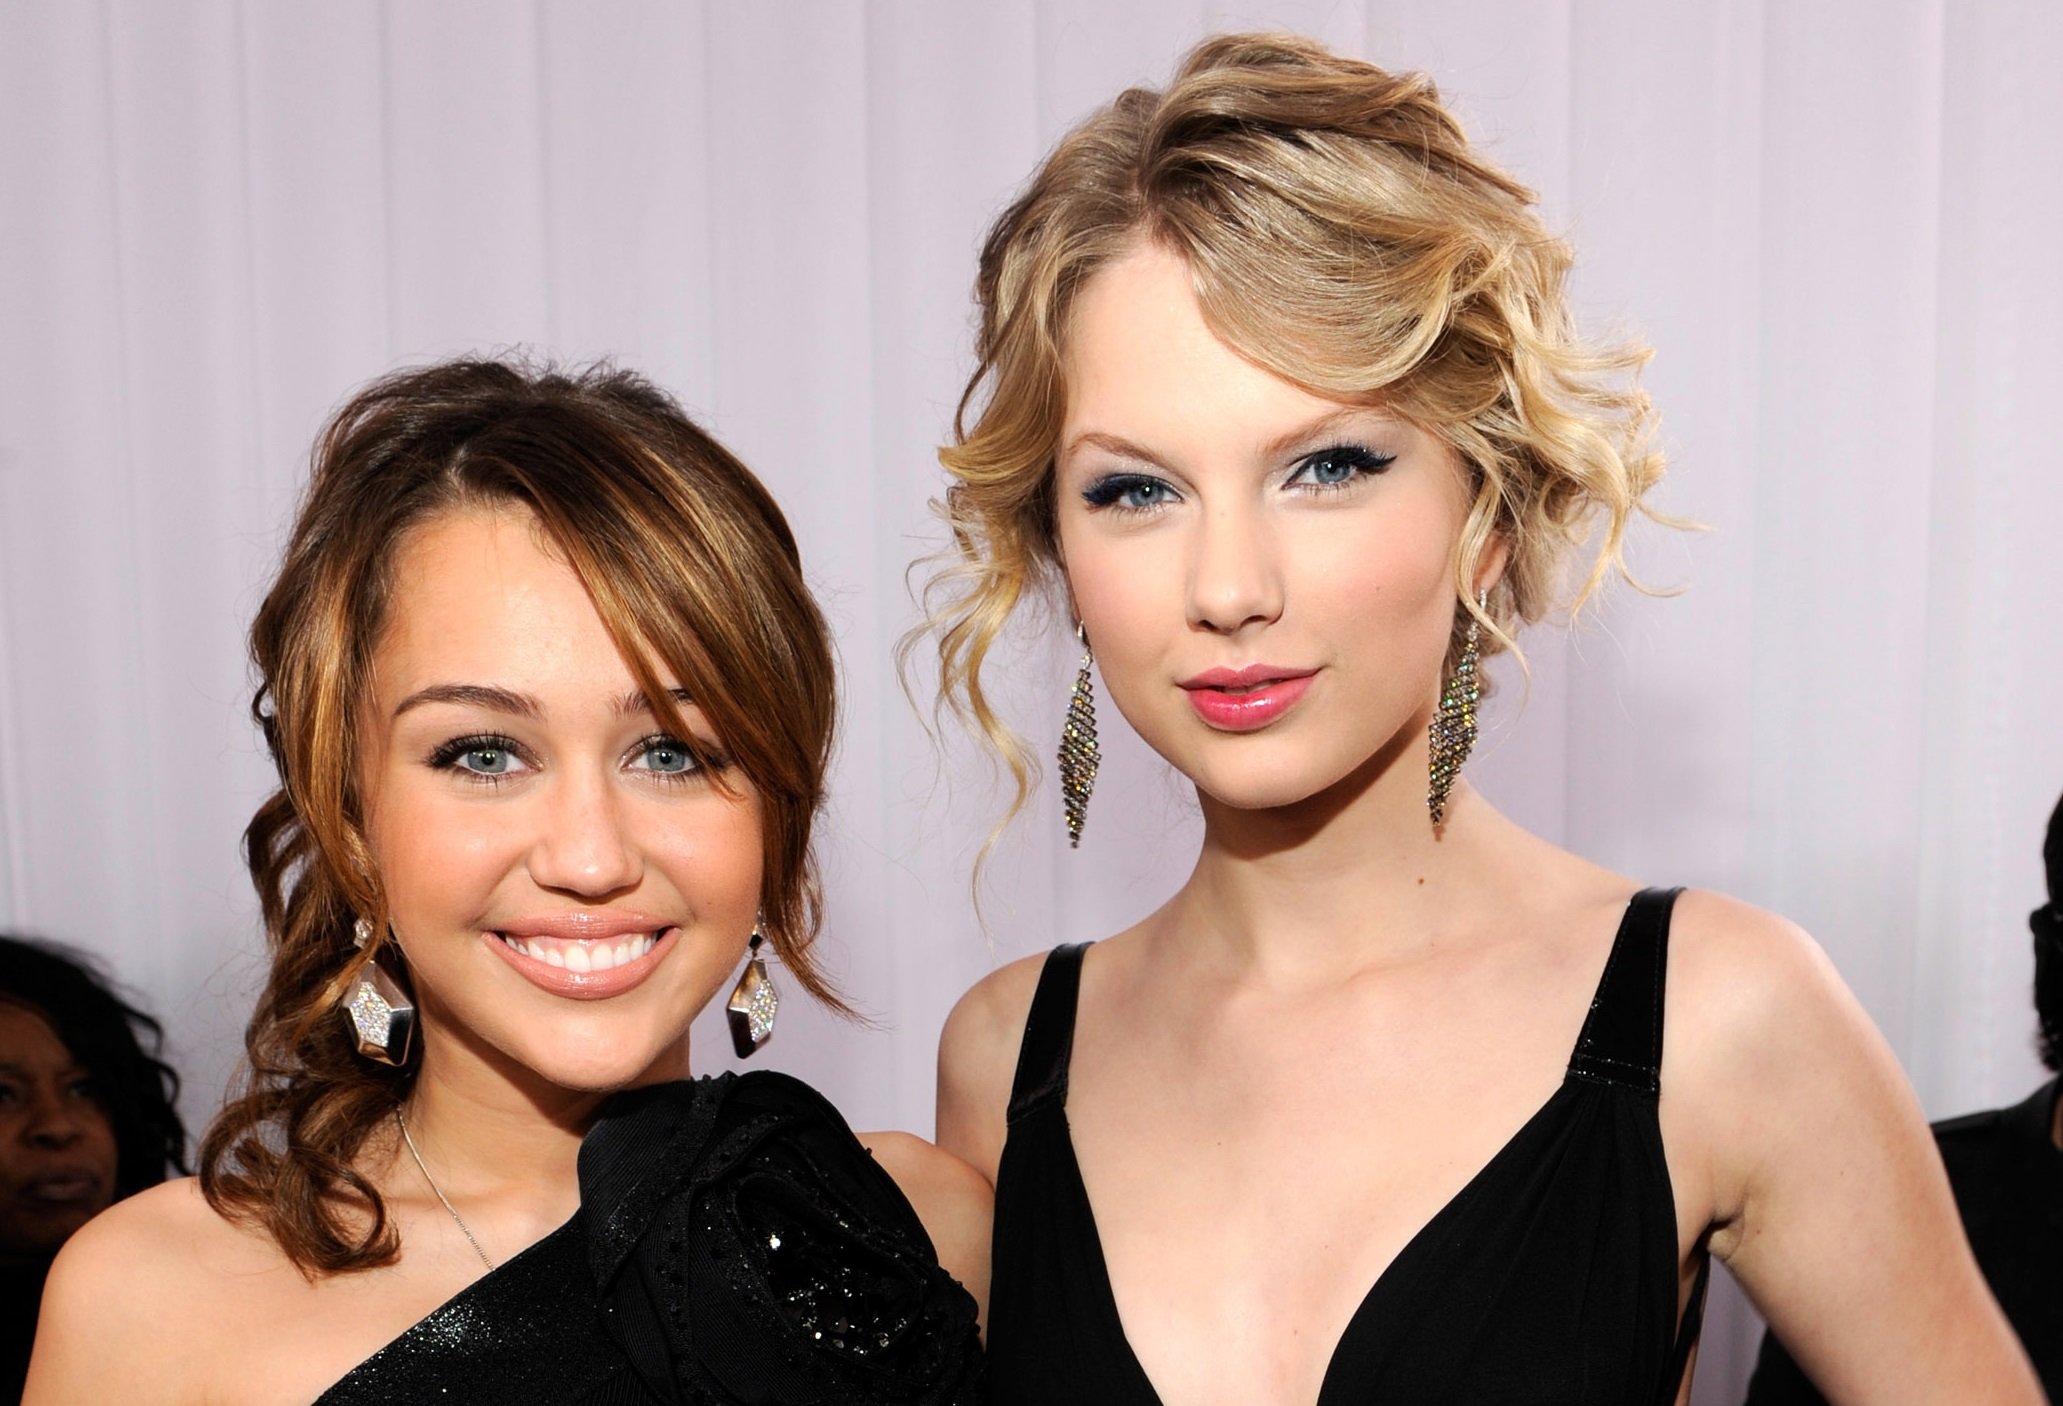 Miley Cyrus and Taylor Swift arrives to the 51st Annual GRAMMY Awards on February 8, 2009 in Los Angeles, California. 